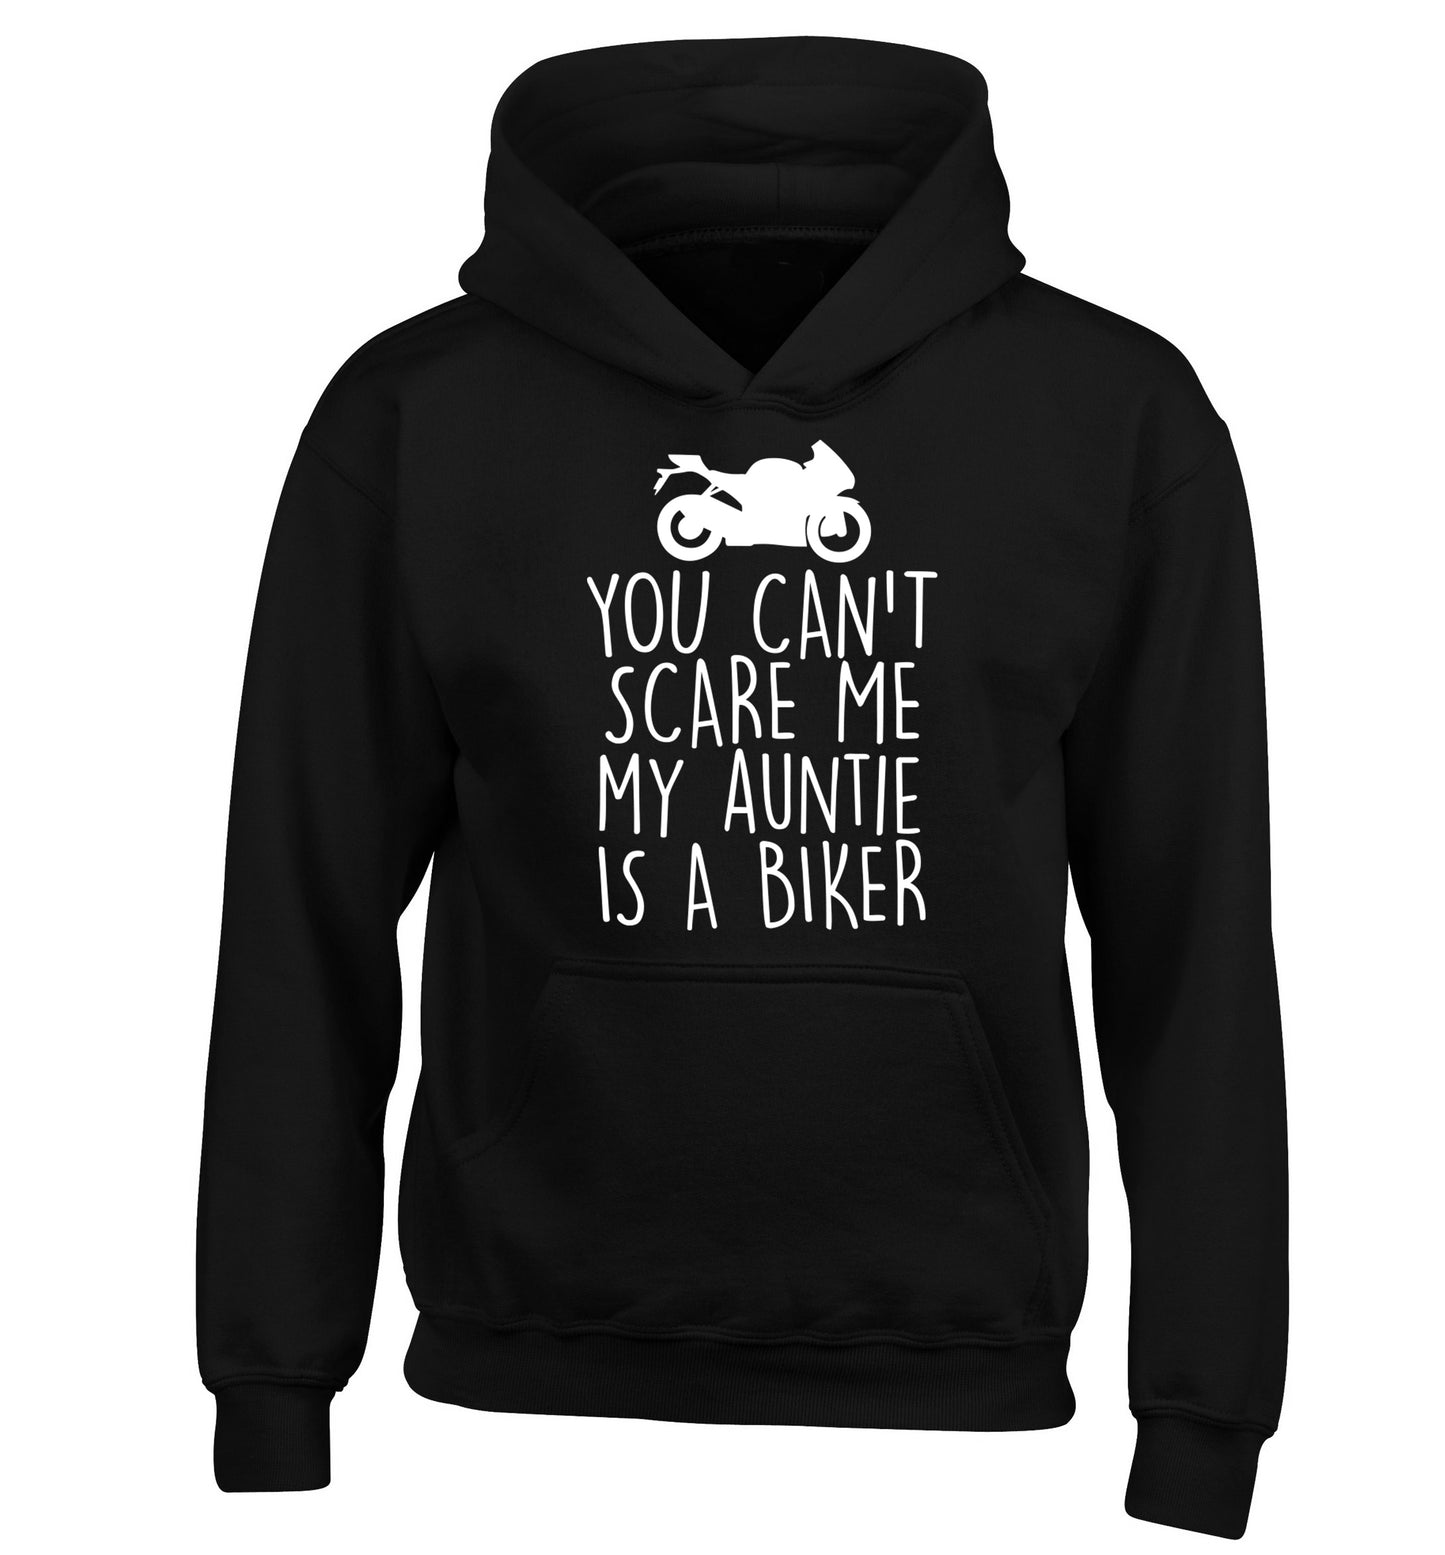 You can't scare me my auntie is a biker children's black hoodie 12-13 Years